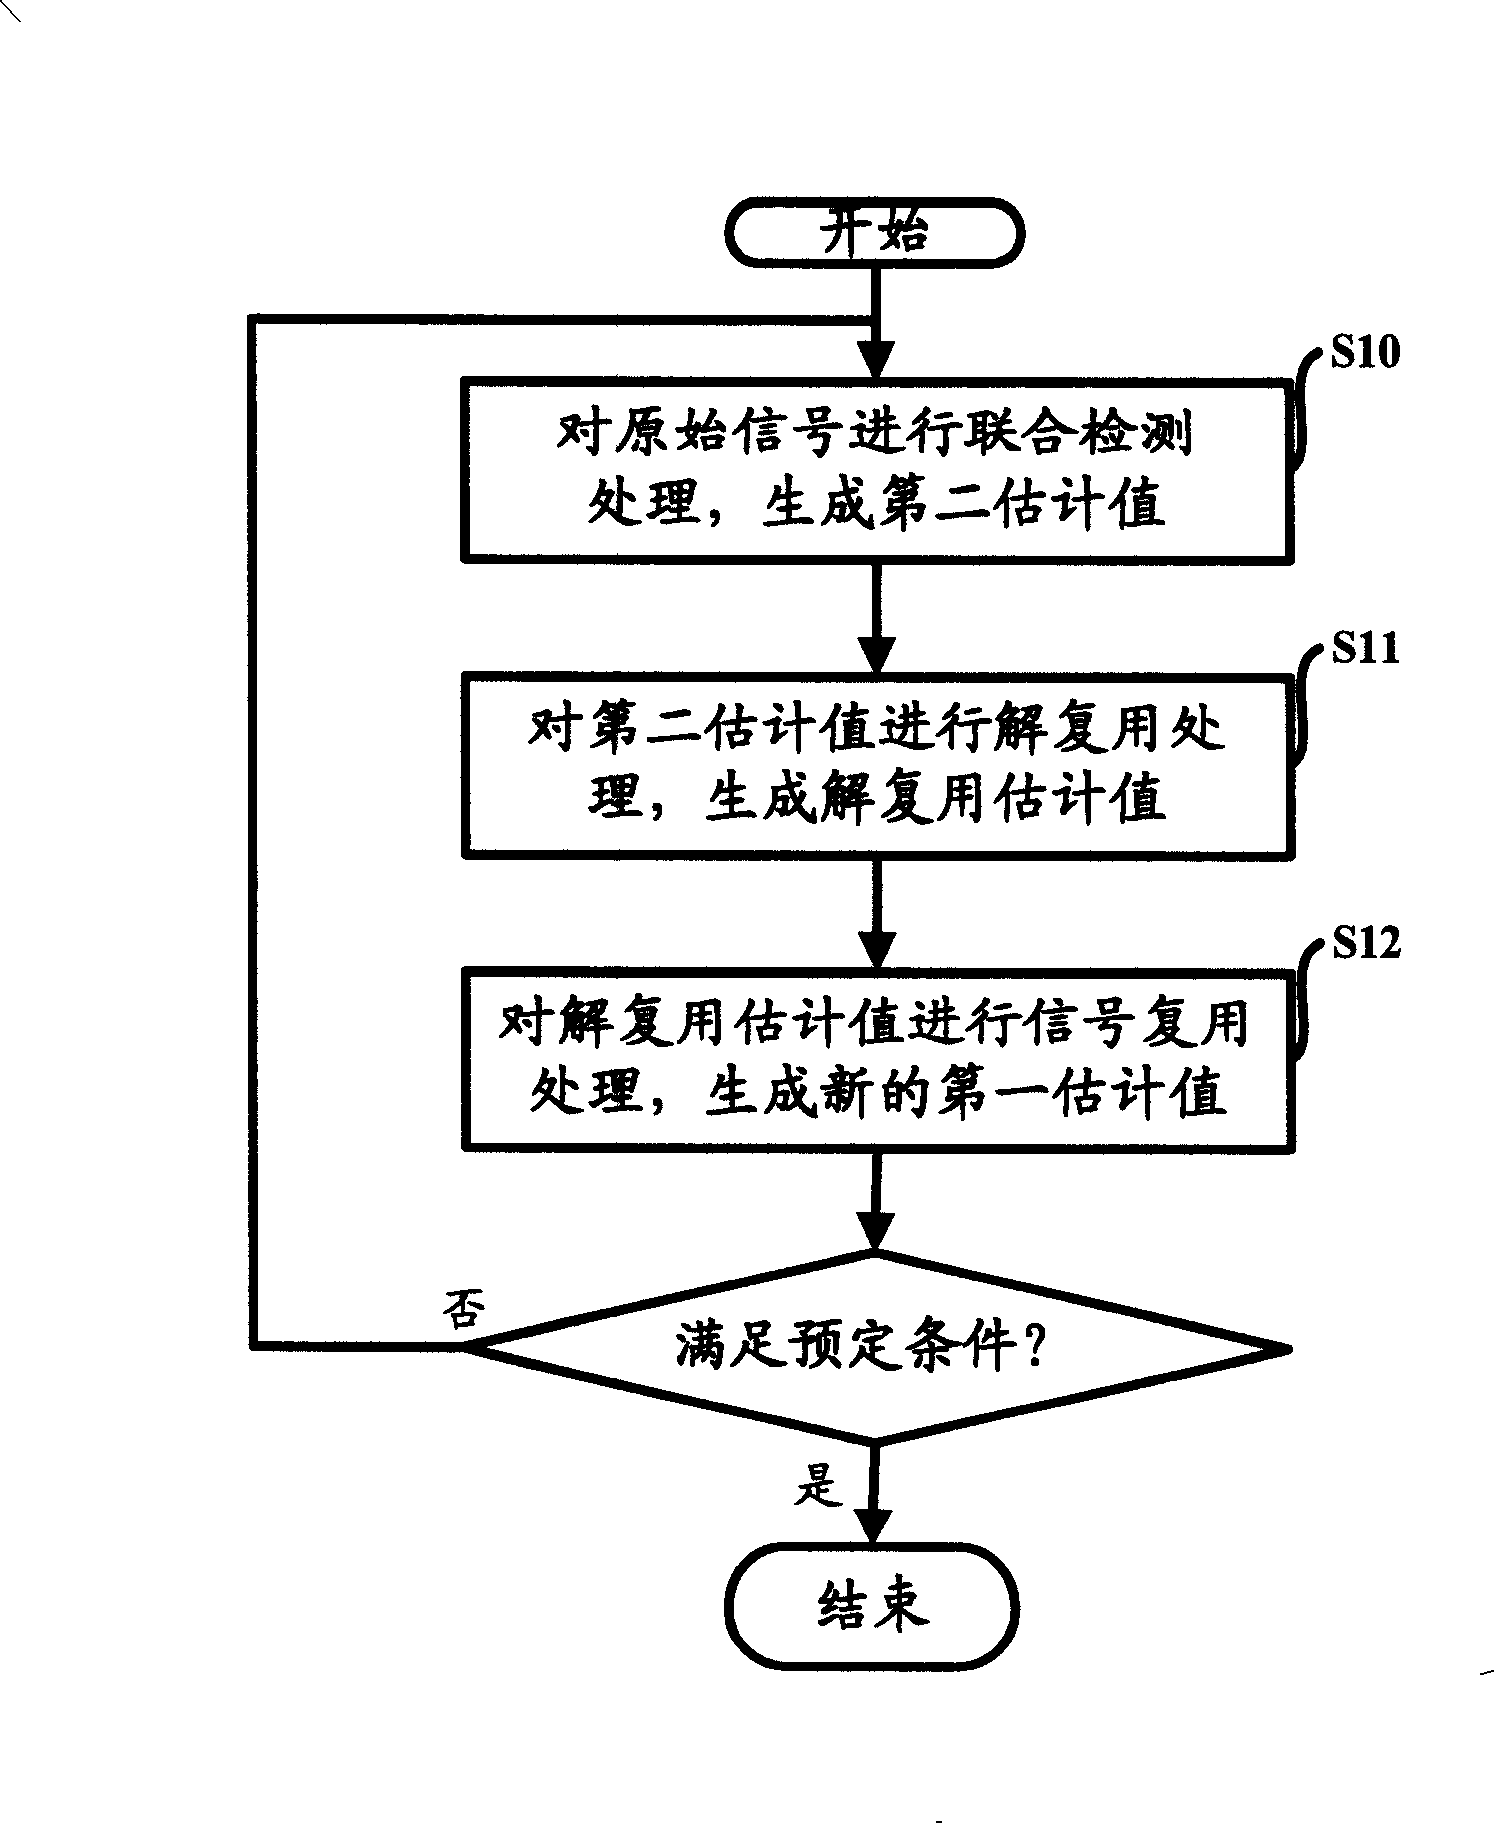 Multi-user detecting method and device in wireless communication network